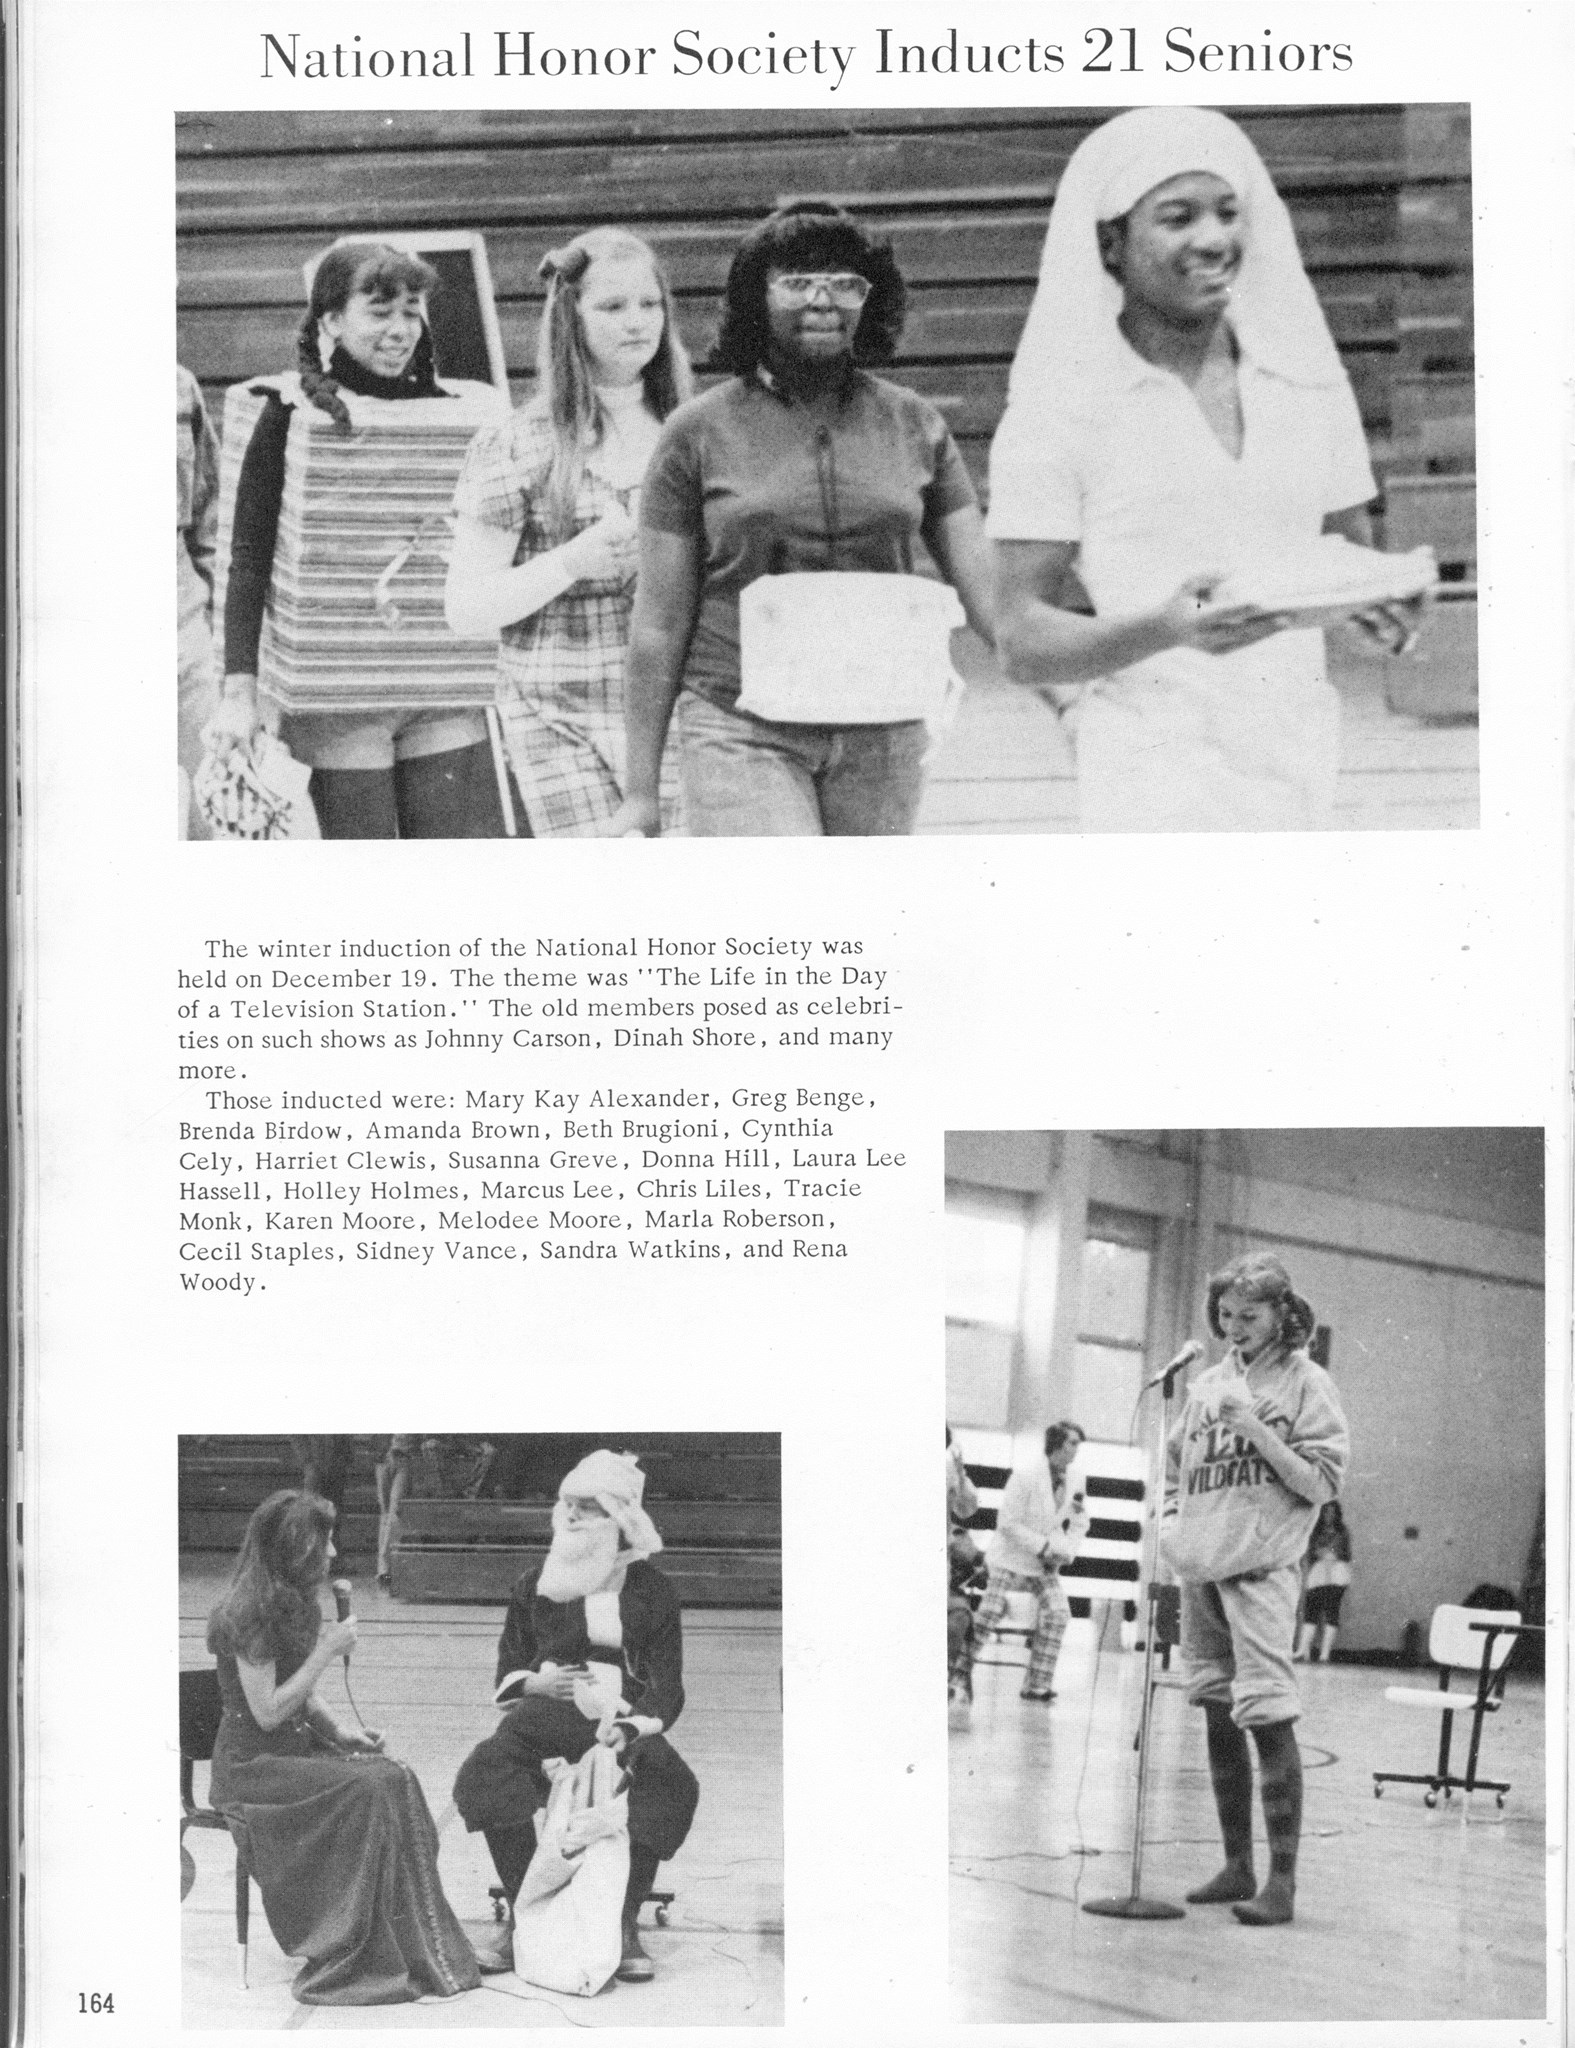 ../../../Images/Large/1976/Arclight-1976-pg0164.jpg